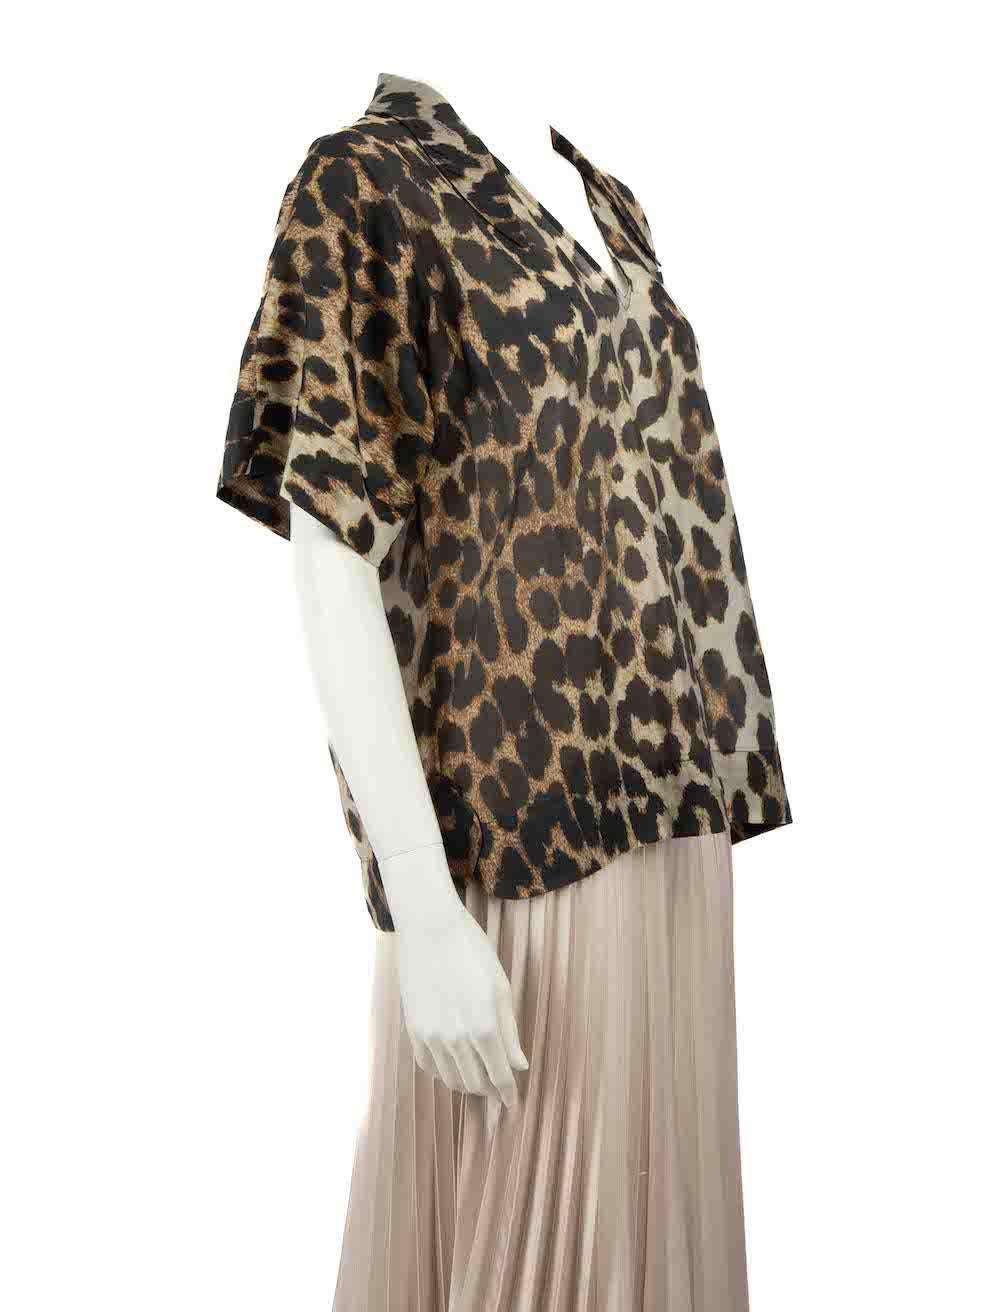 CONDITION is Very good. Hardly any visible wear to top is evident on this used Ganni designer resale item.
 
 Details
 Brown
 Synthetic
 Top
 Leopard print
 Short sleeves
 V-neck
 Sheer
 
 
 Made in China
 
 Composition
 85% Lyocell tencel, 15%